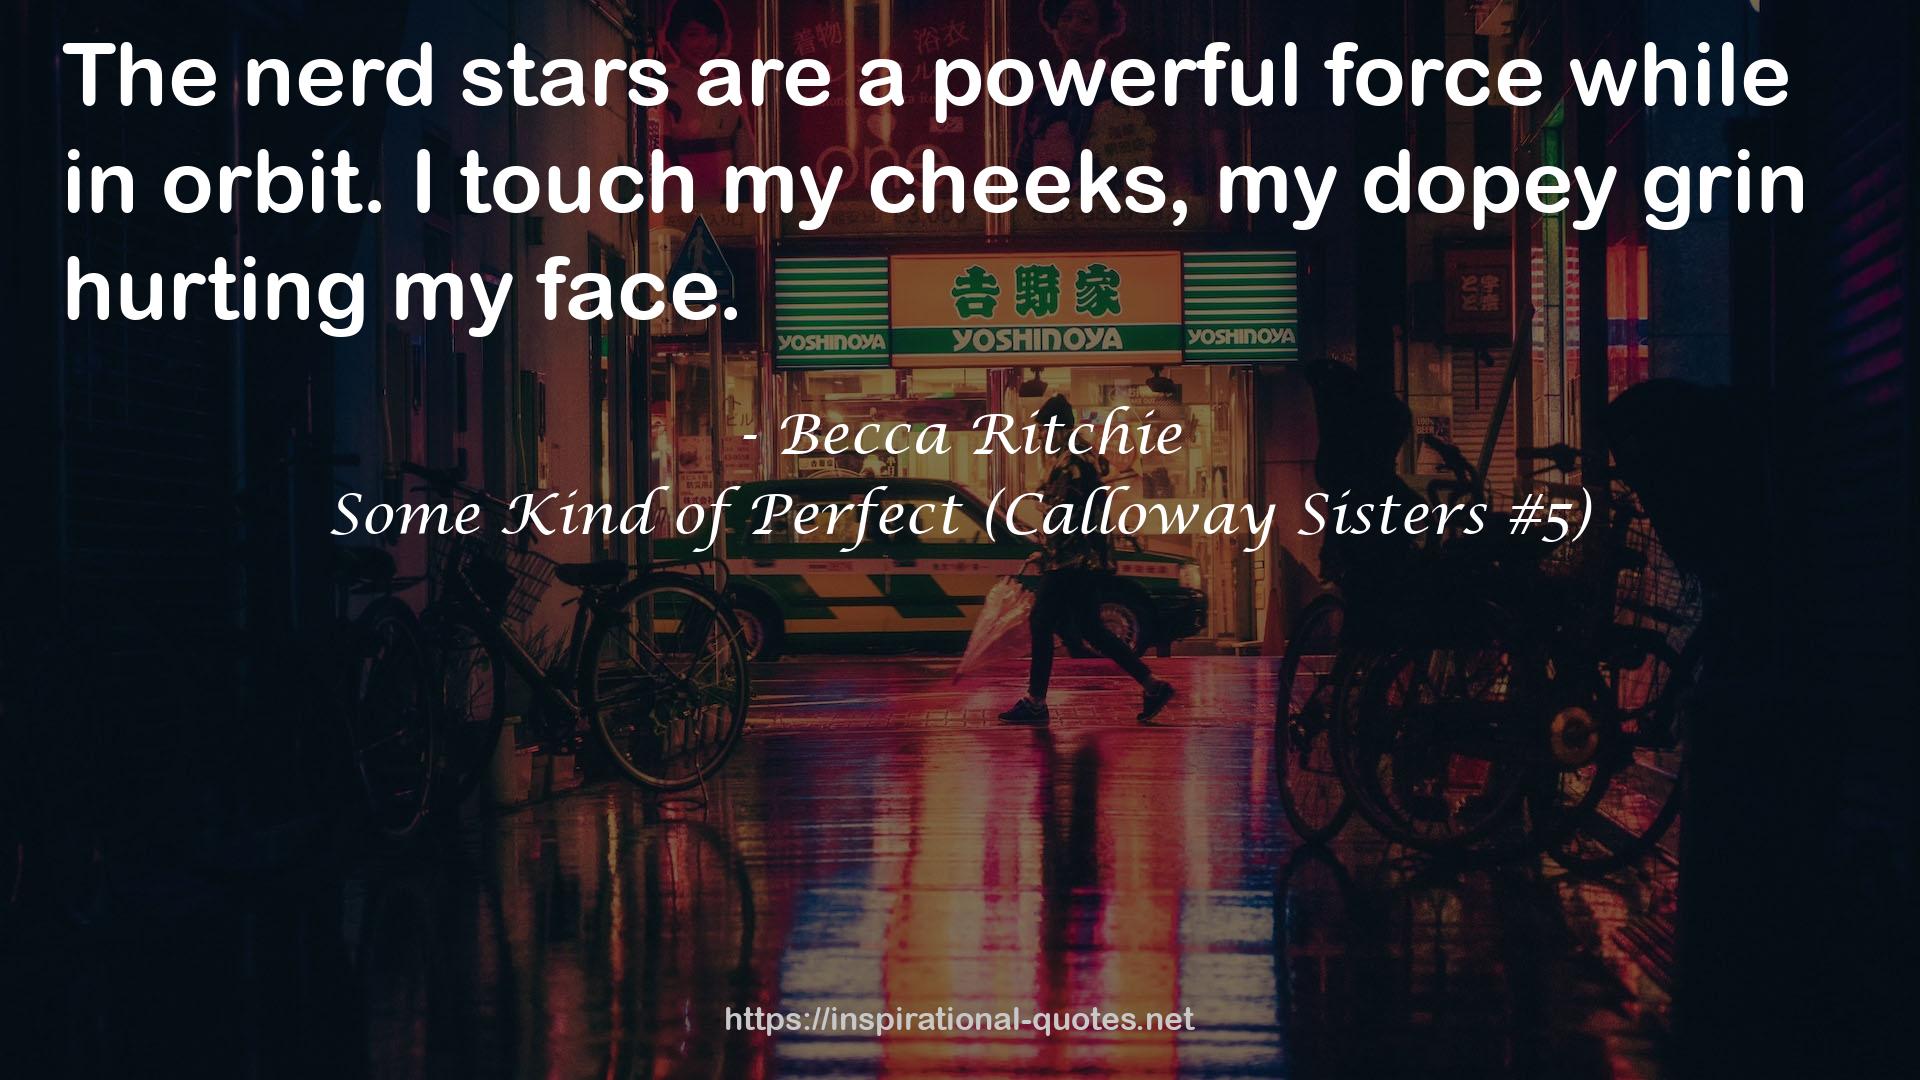 Some Kind of Perfect (Calloway Sisters #5) QUOTES